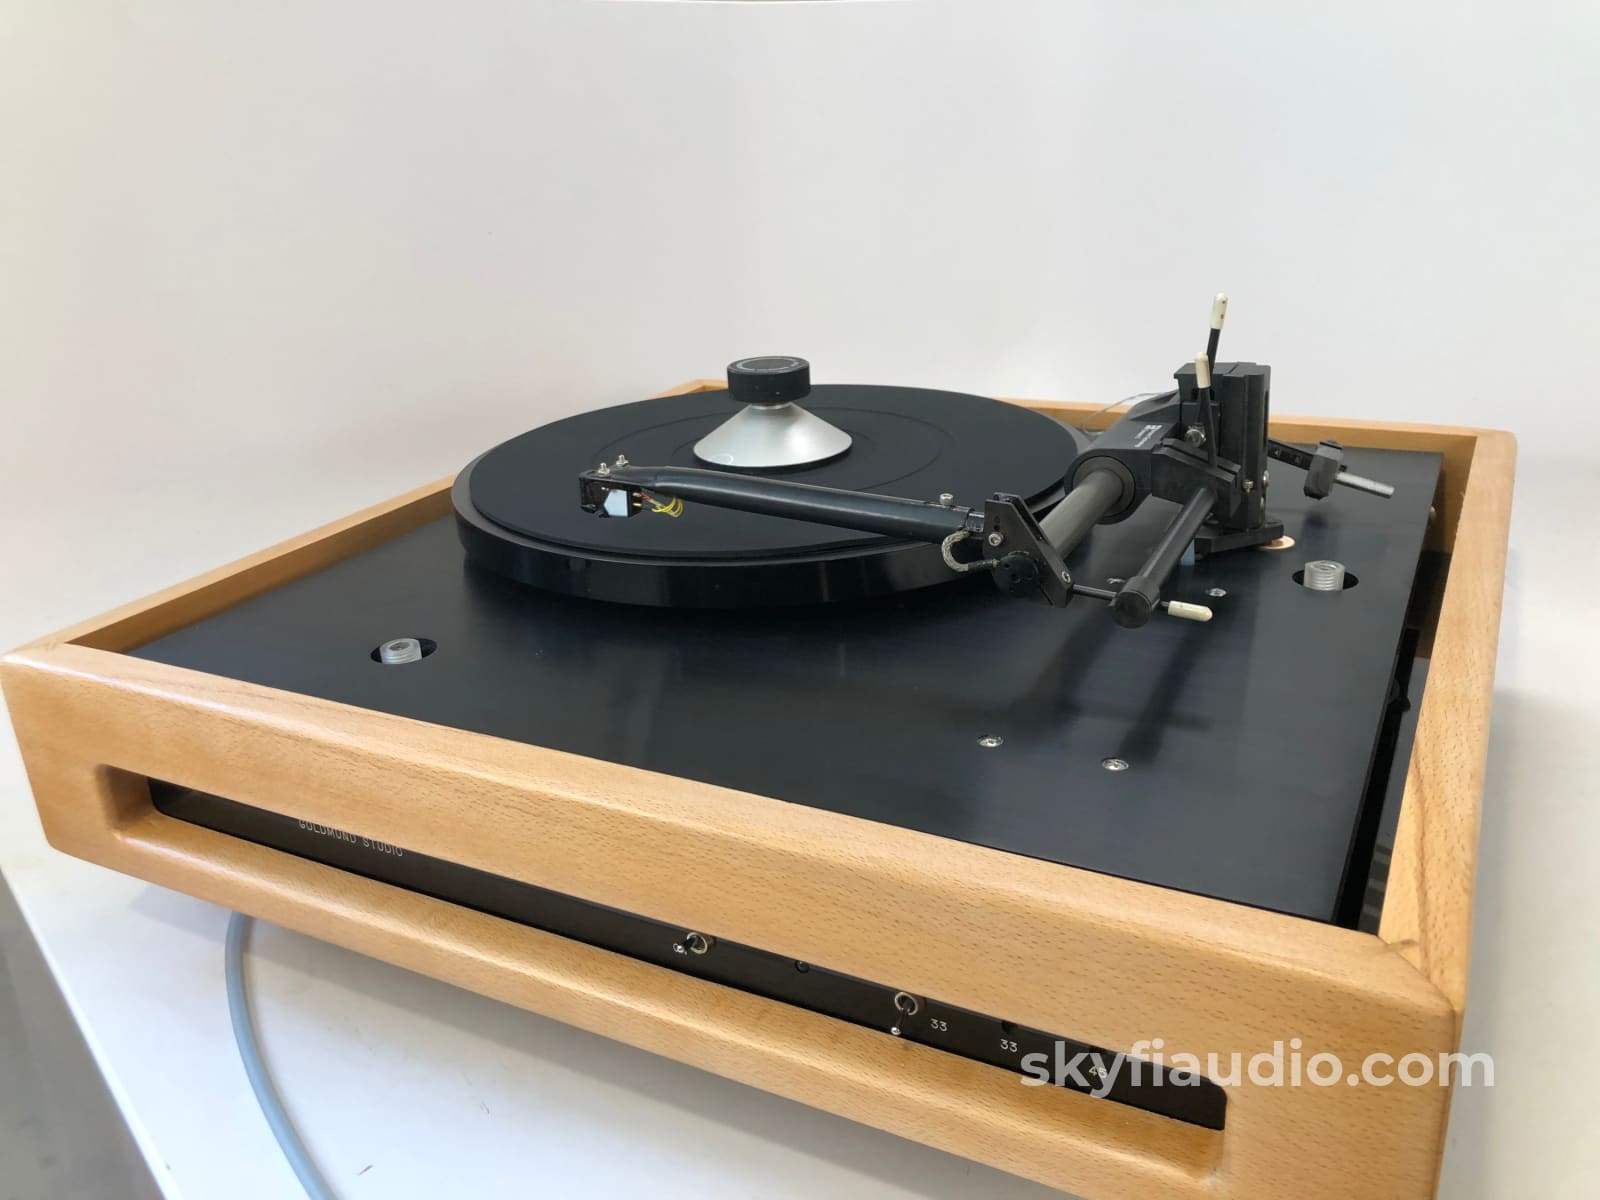 Goldmund Studio Turntable With Eminent Technologies Linear Air Bearing Arm And Grado Cartridge